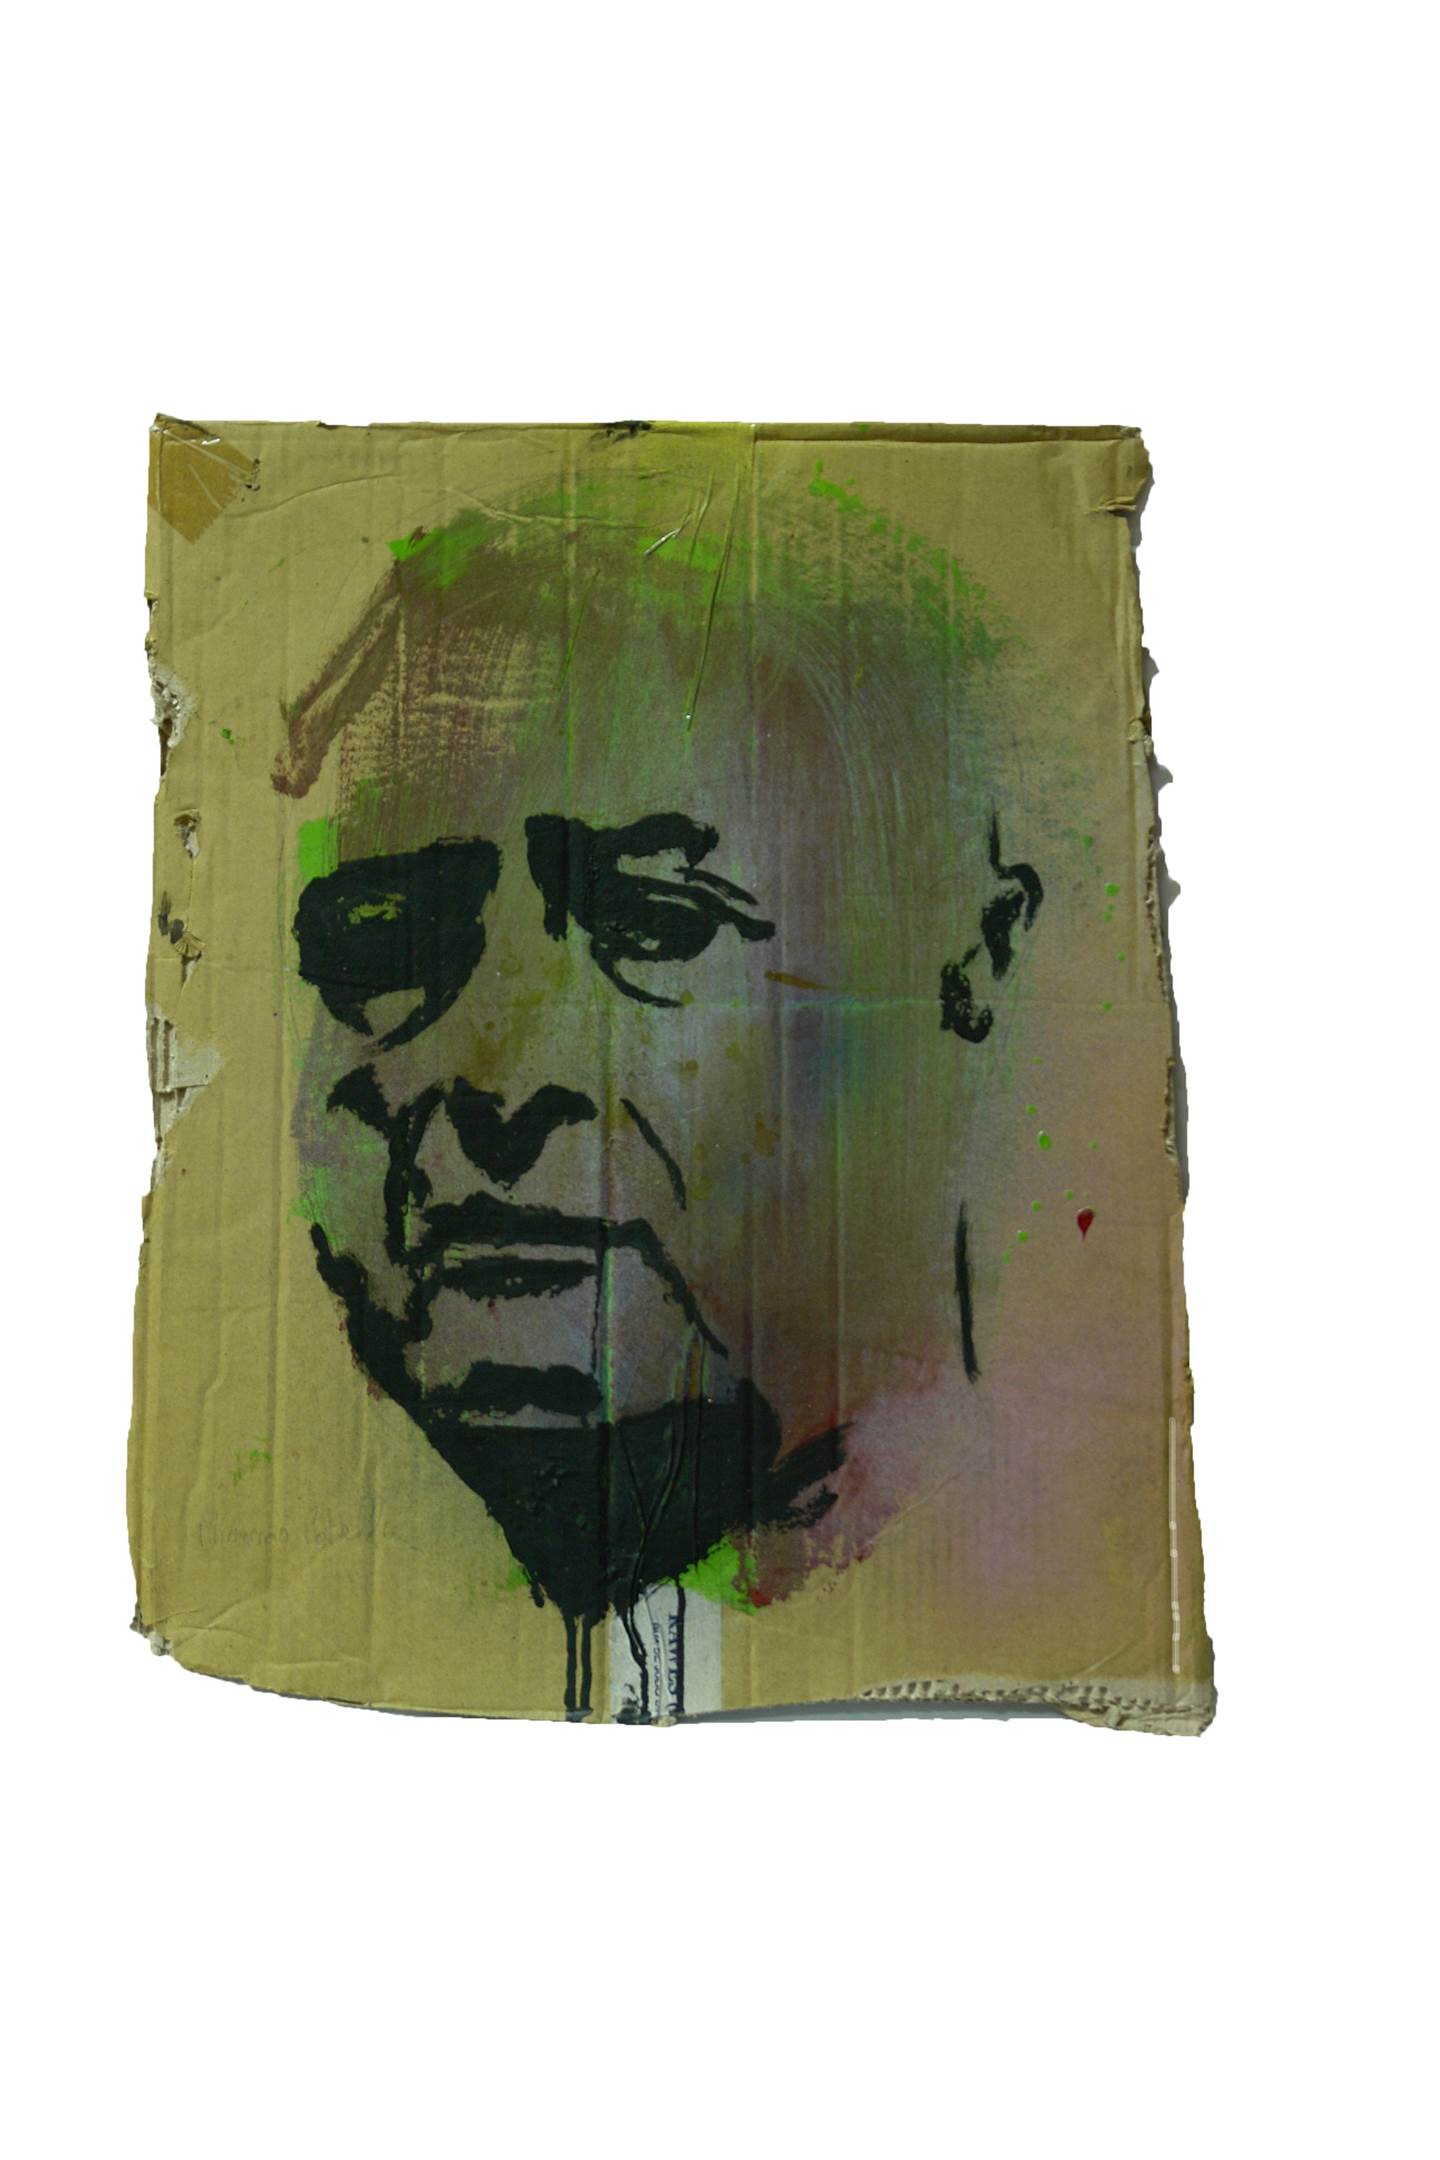 Mimmo Rotella, original Portrait Mixed Technique Painting by Alexandre Rola